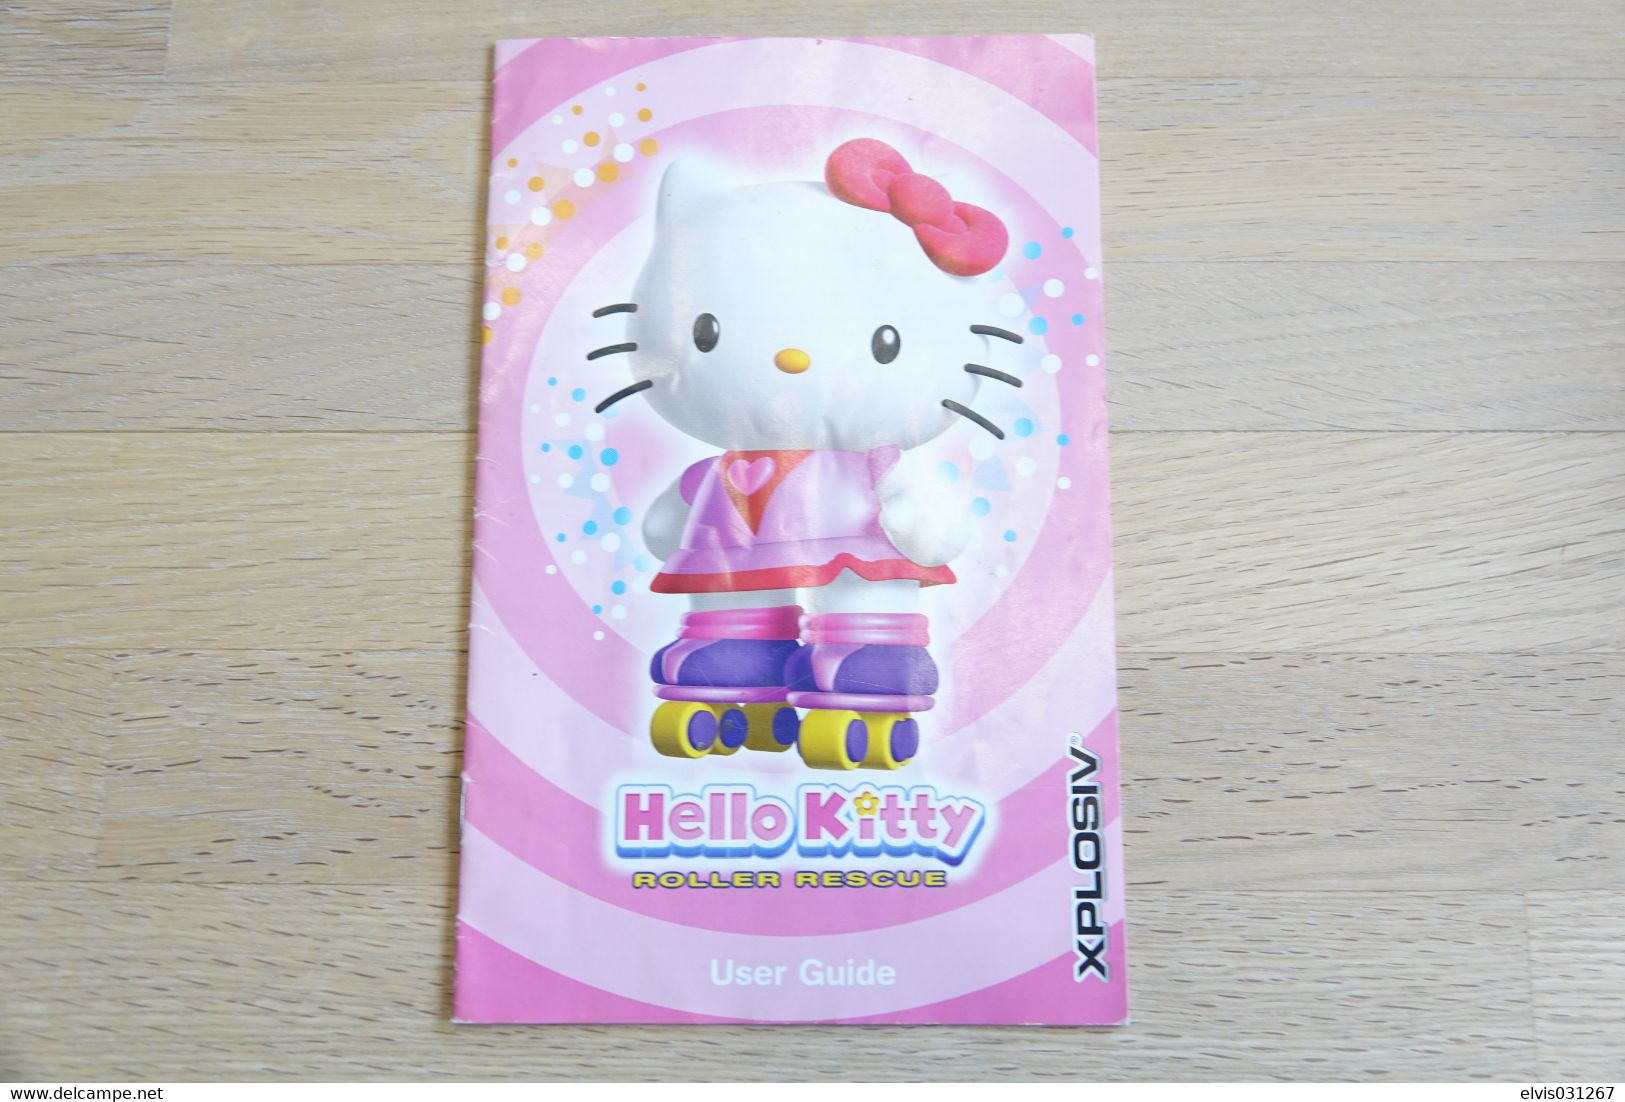 SONY PLAYSTATION TWO 2 PS2 : MANUAL : HELLO KITTY ROLLER RESCUE - Literature & Instructions